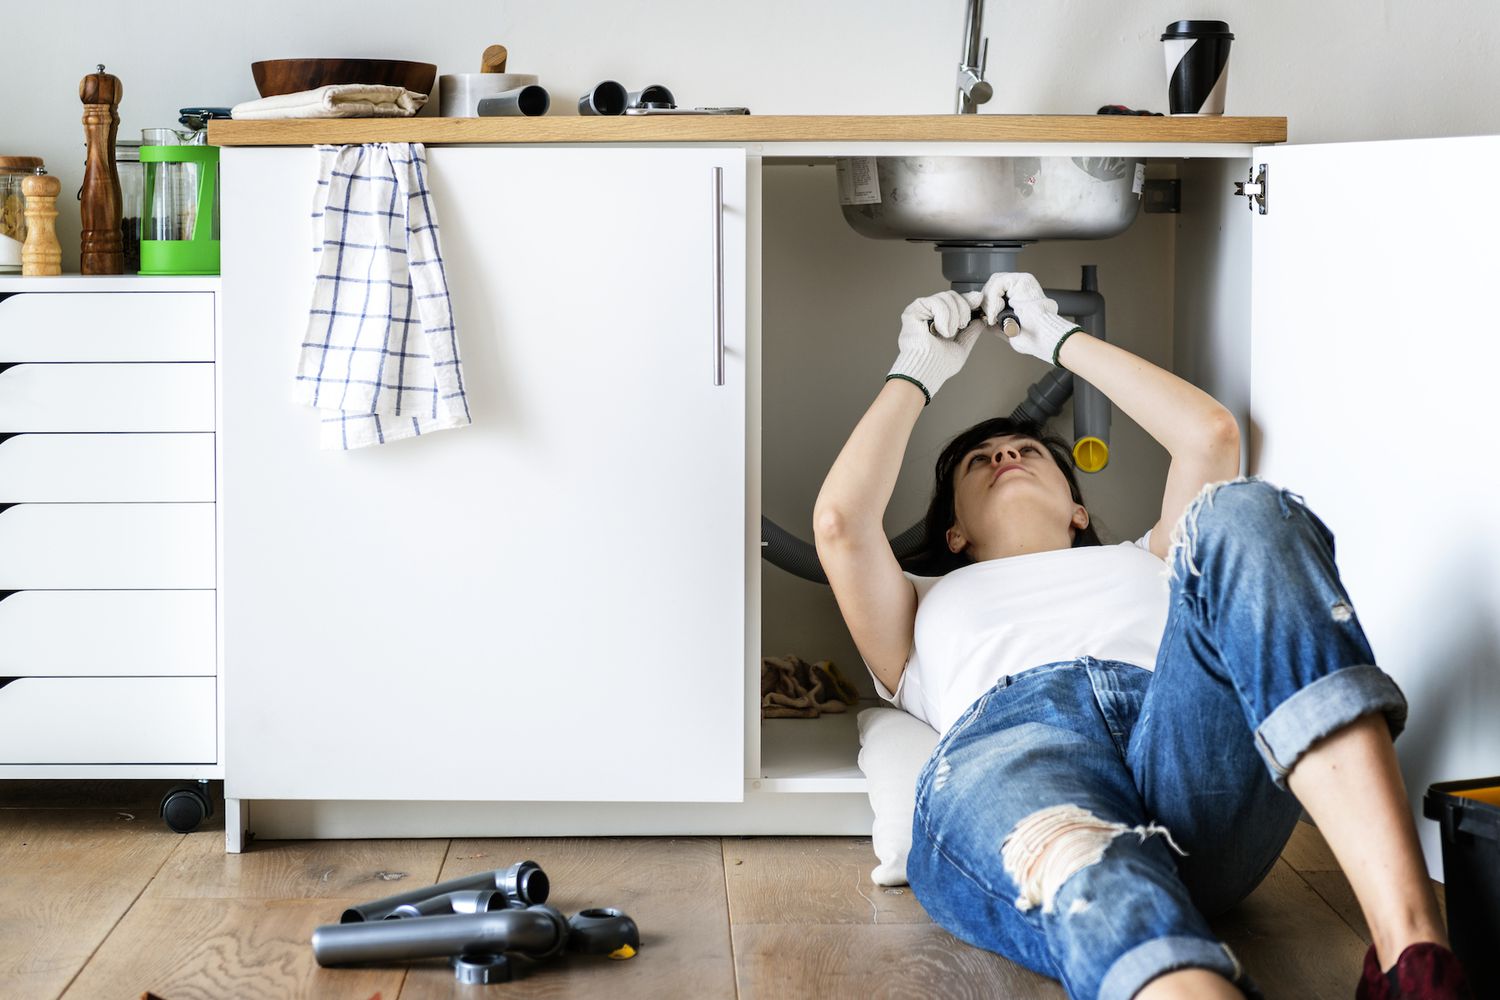 Home Repair and Improvement: When it’s Time To Bring in a Pro | MessHall